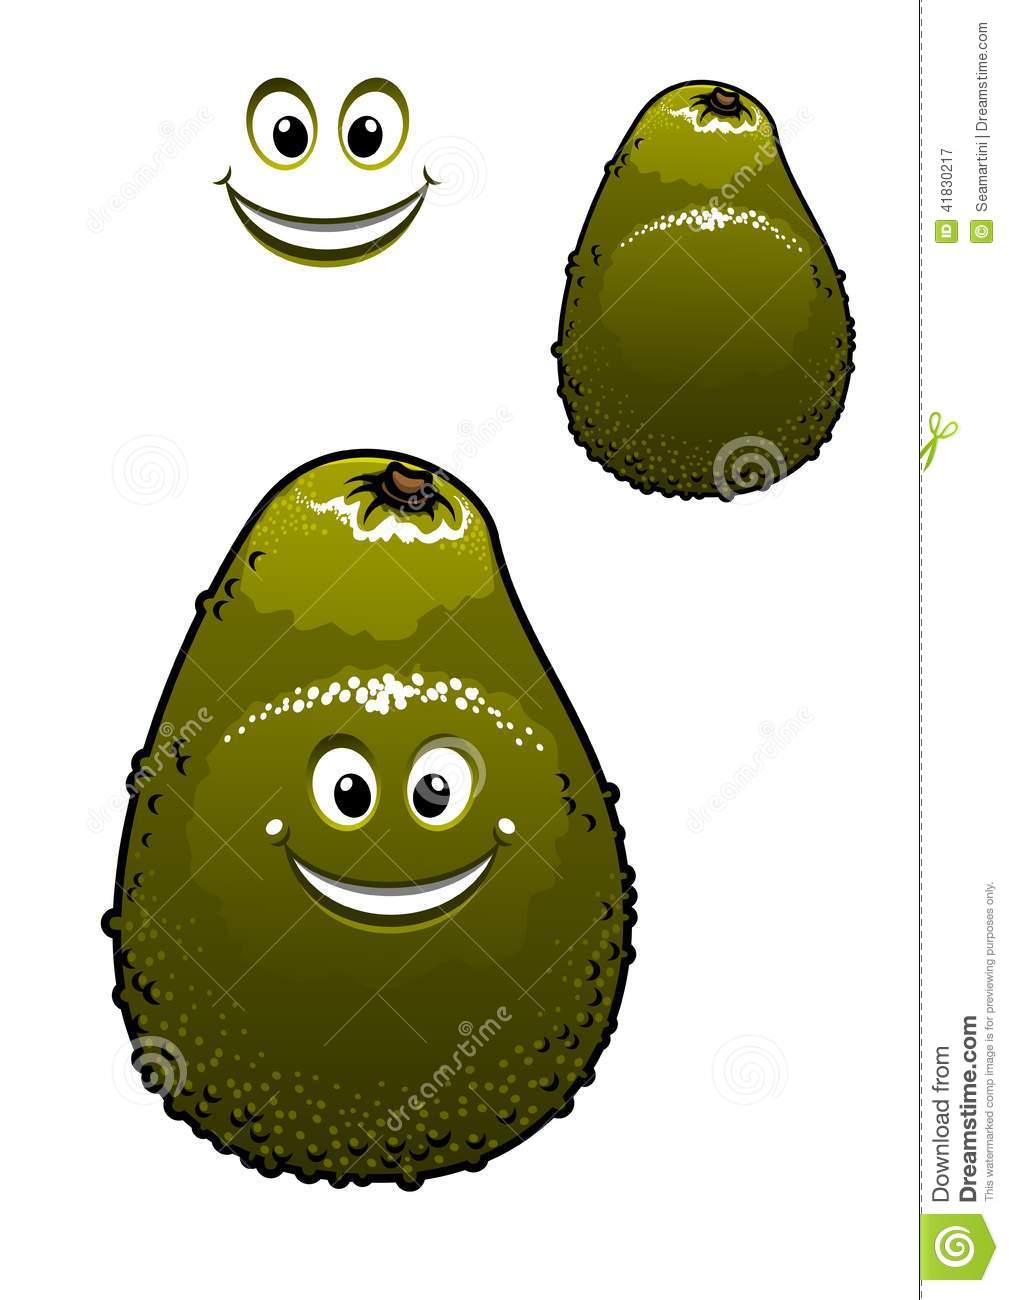 Avocado Fruit With A Beaming Smile And Dimples Isolated On White